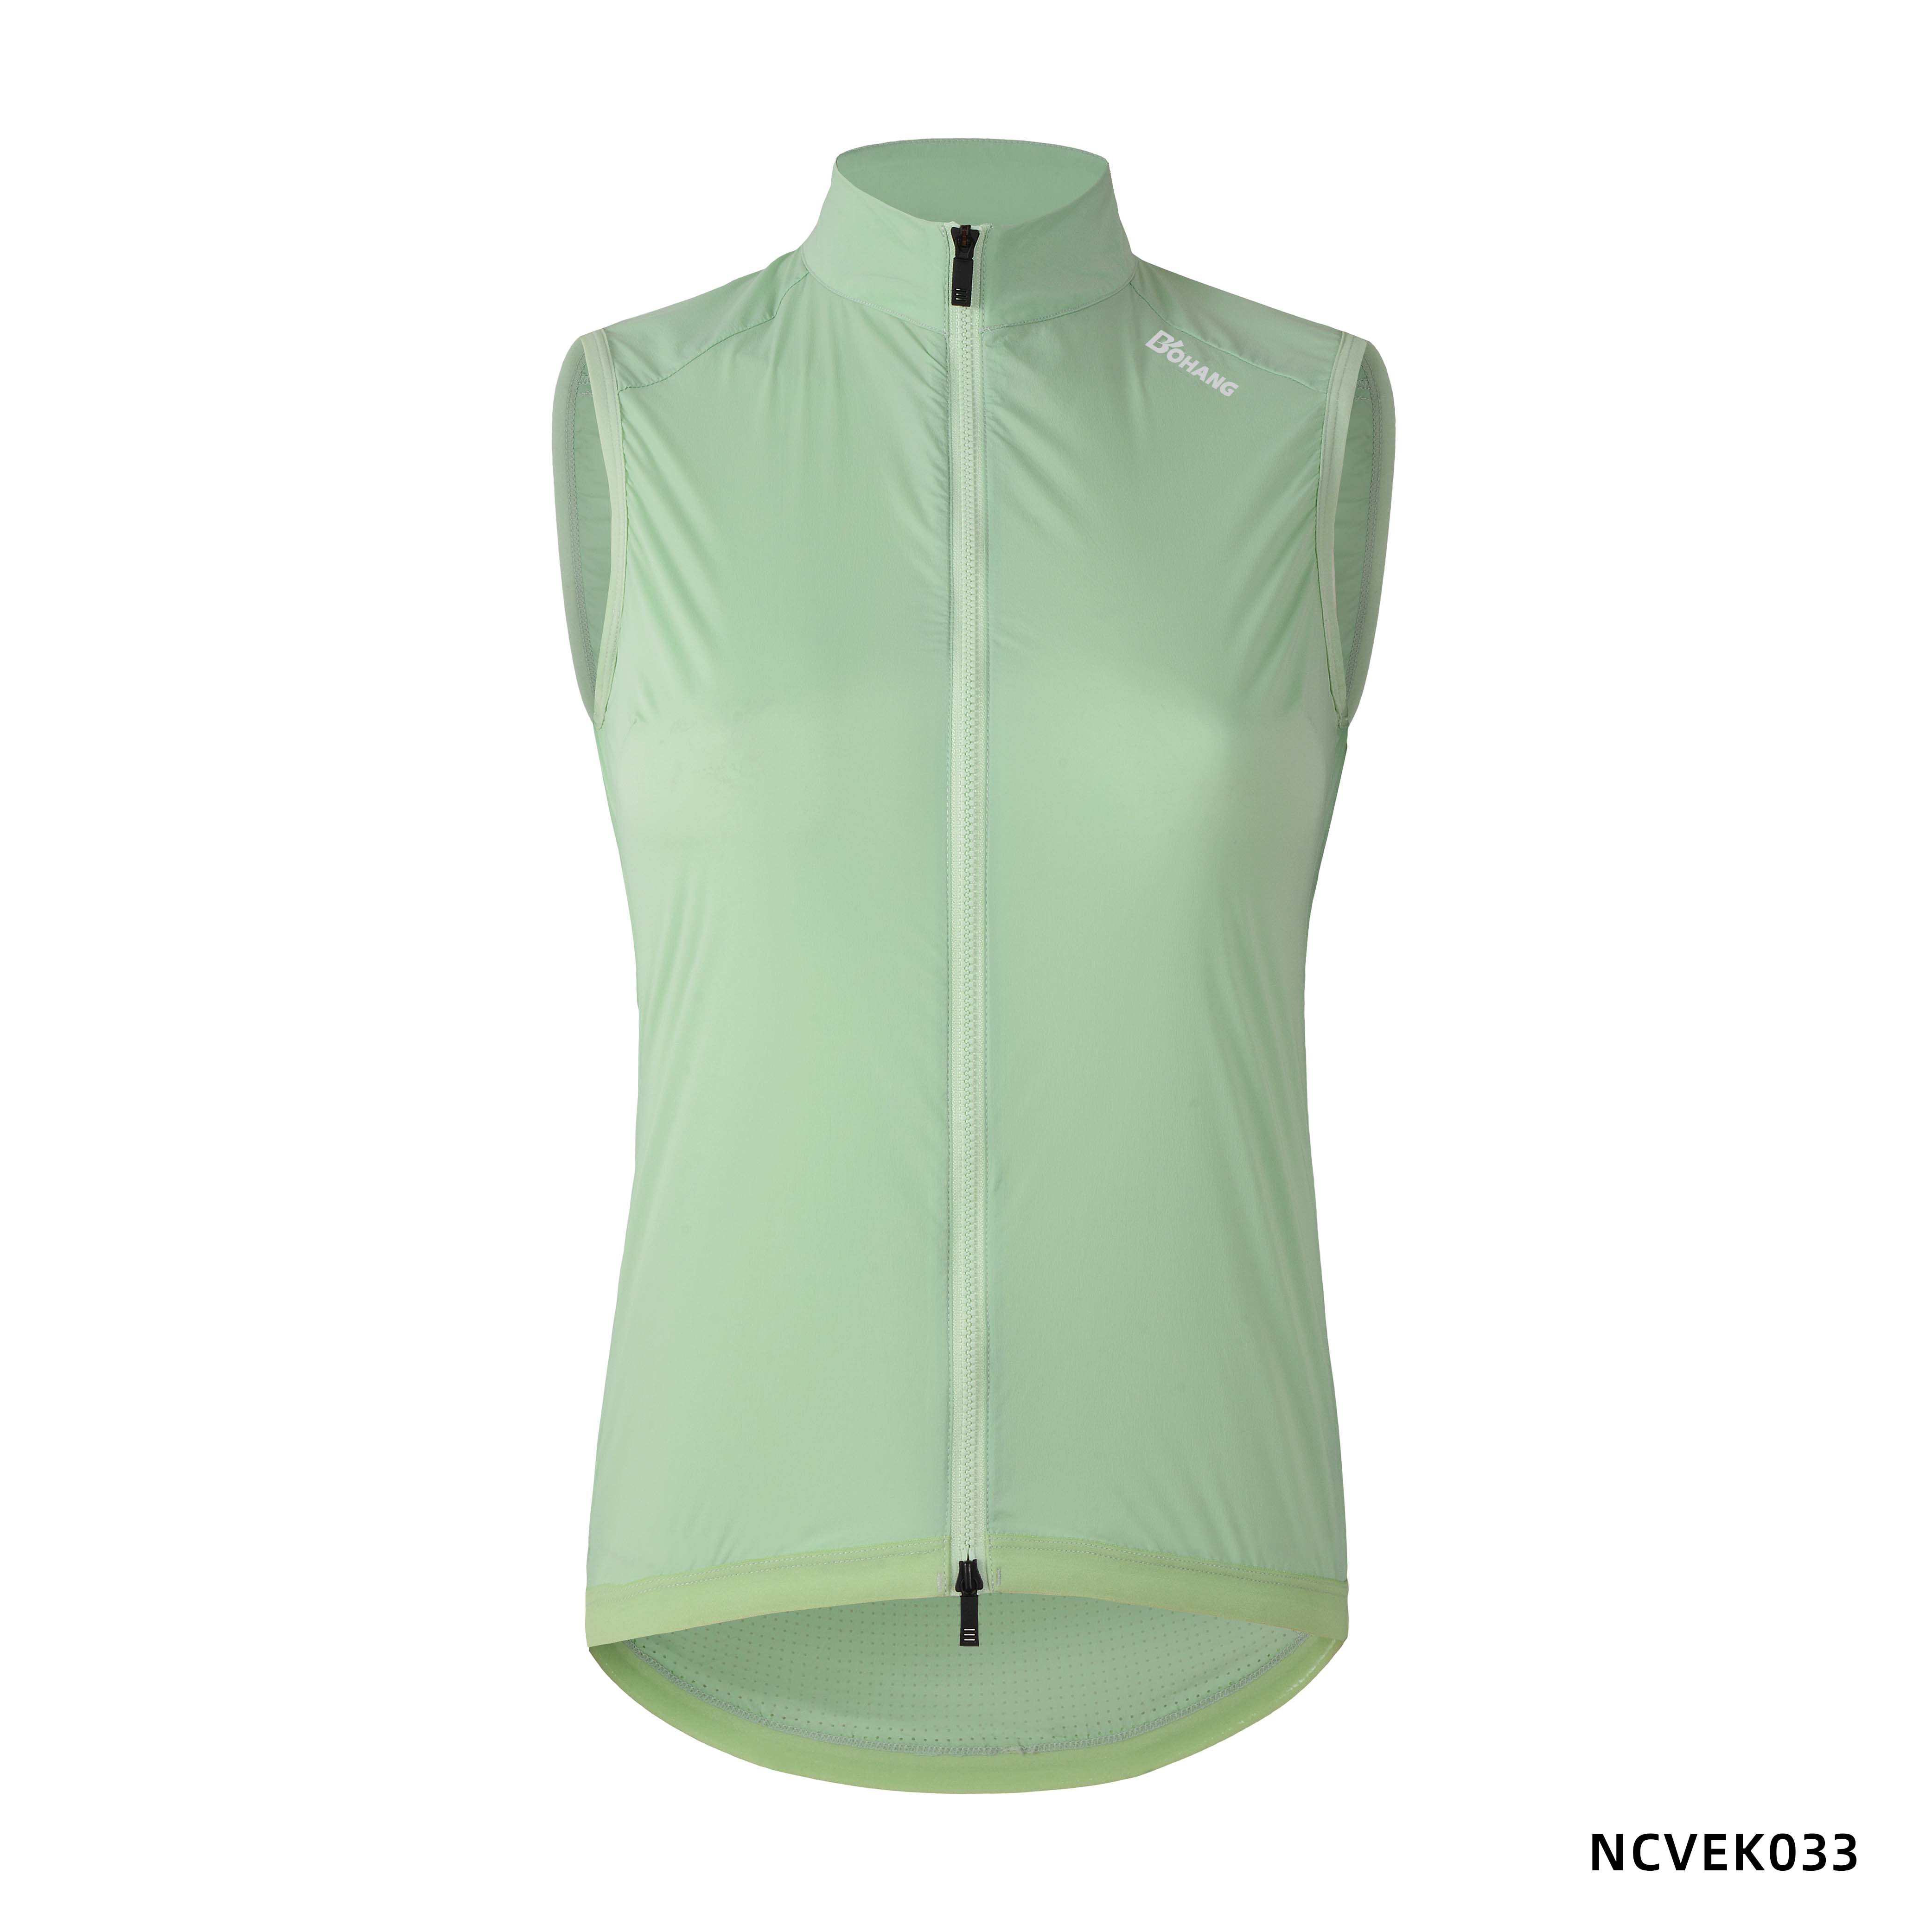 Experience the Comfort and Convenience of the NCVEK033 Lightweight Cycling Vest